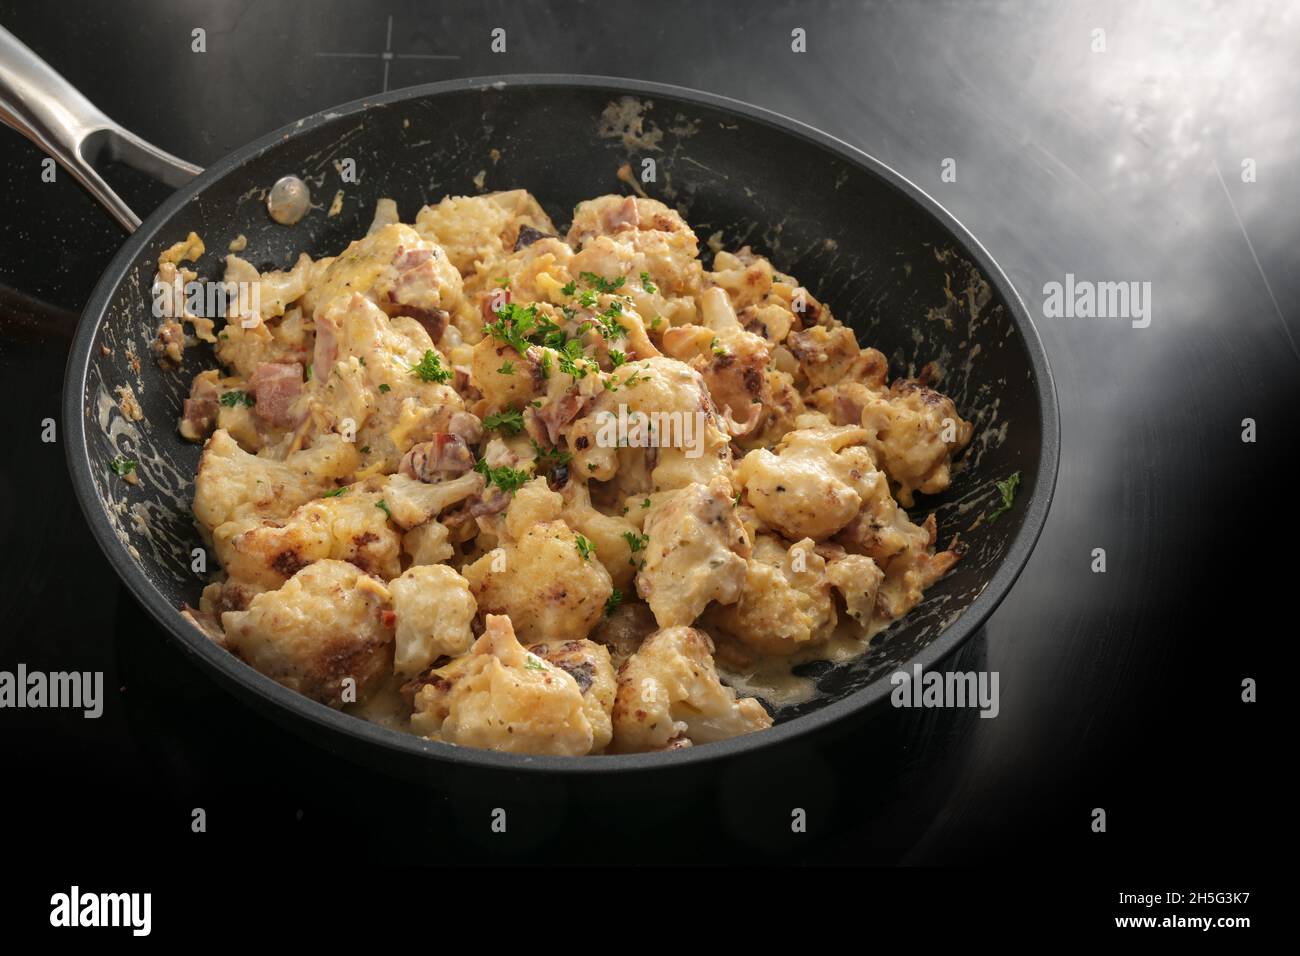 Frying pan with cauliflower florets, ham and a sauce from cream, cheese and egg, parsley garnish, cooking with vegetables for a ketogenic or low carb Stock Photo